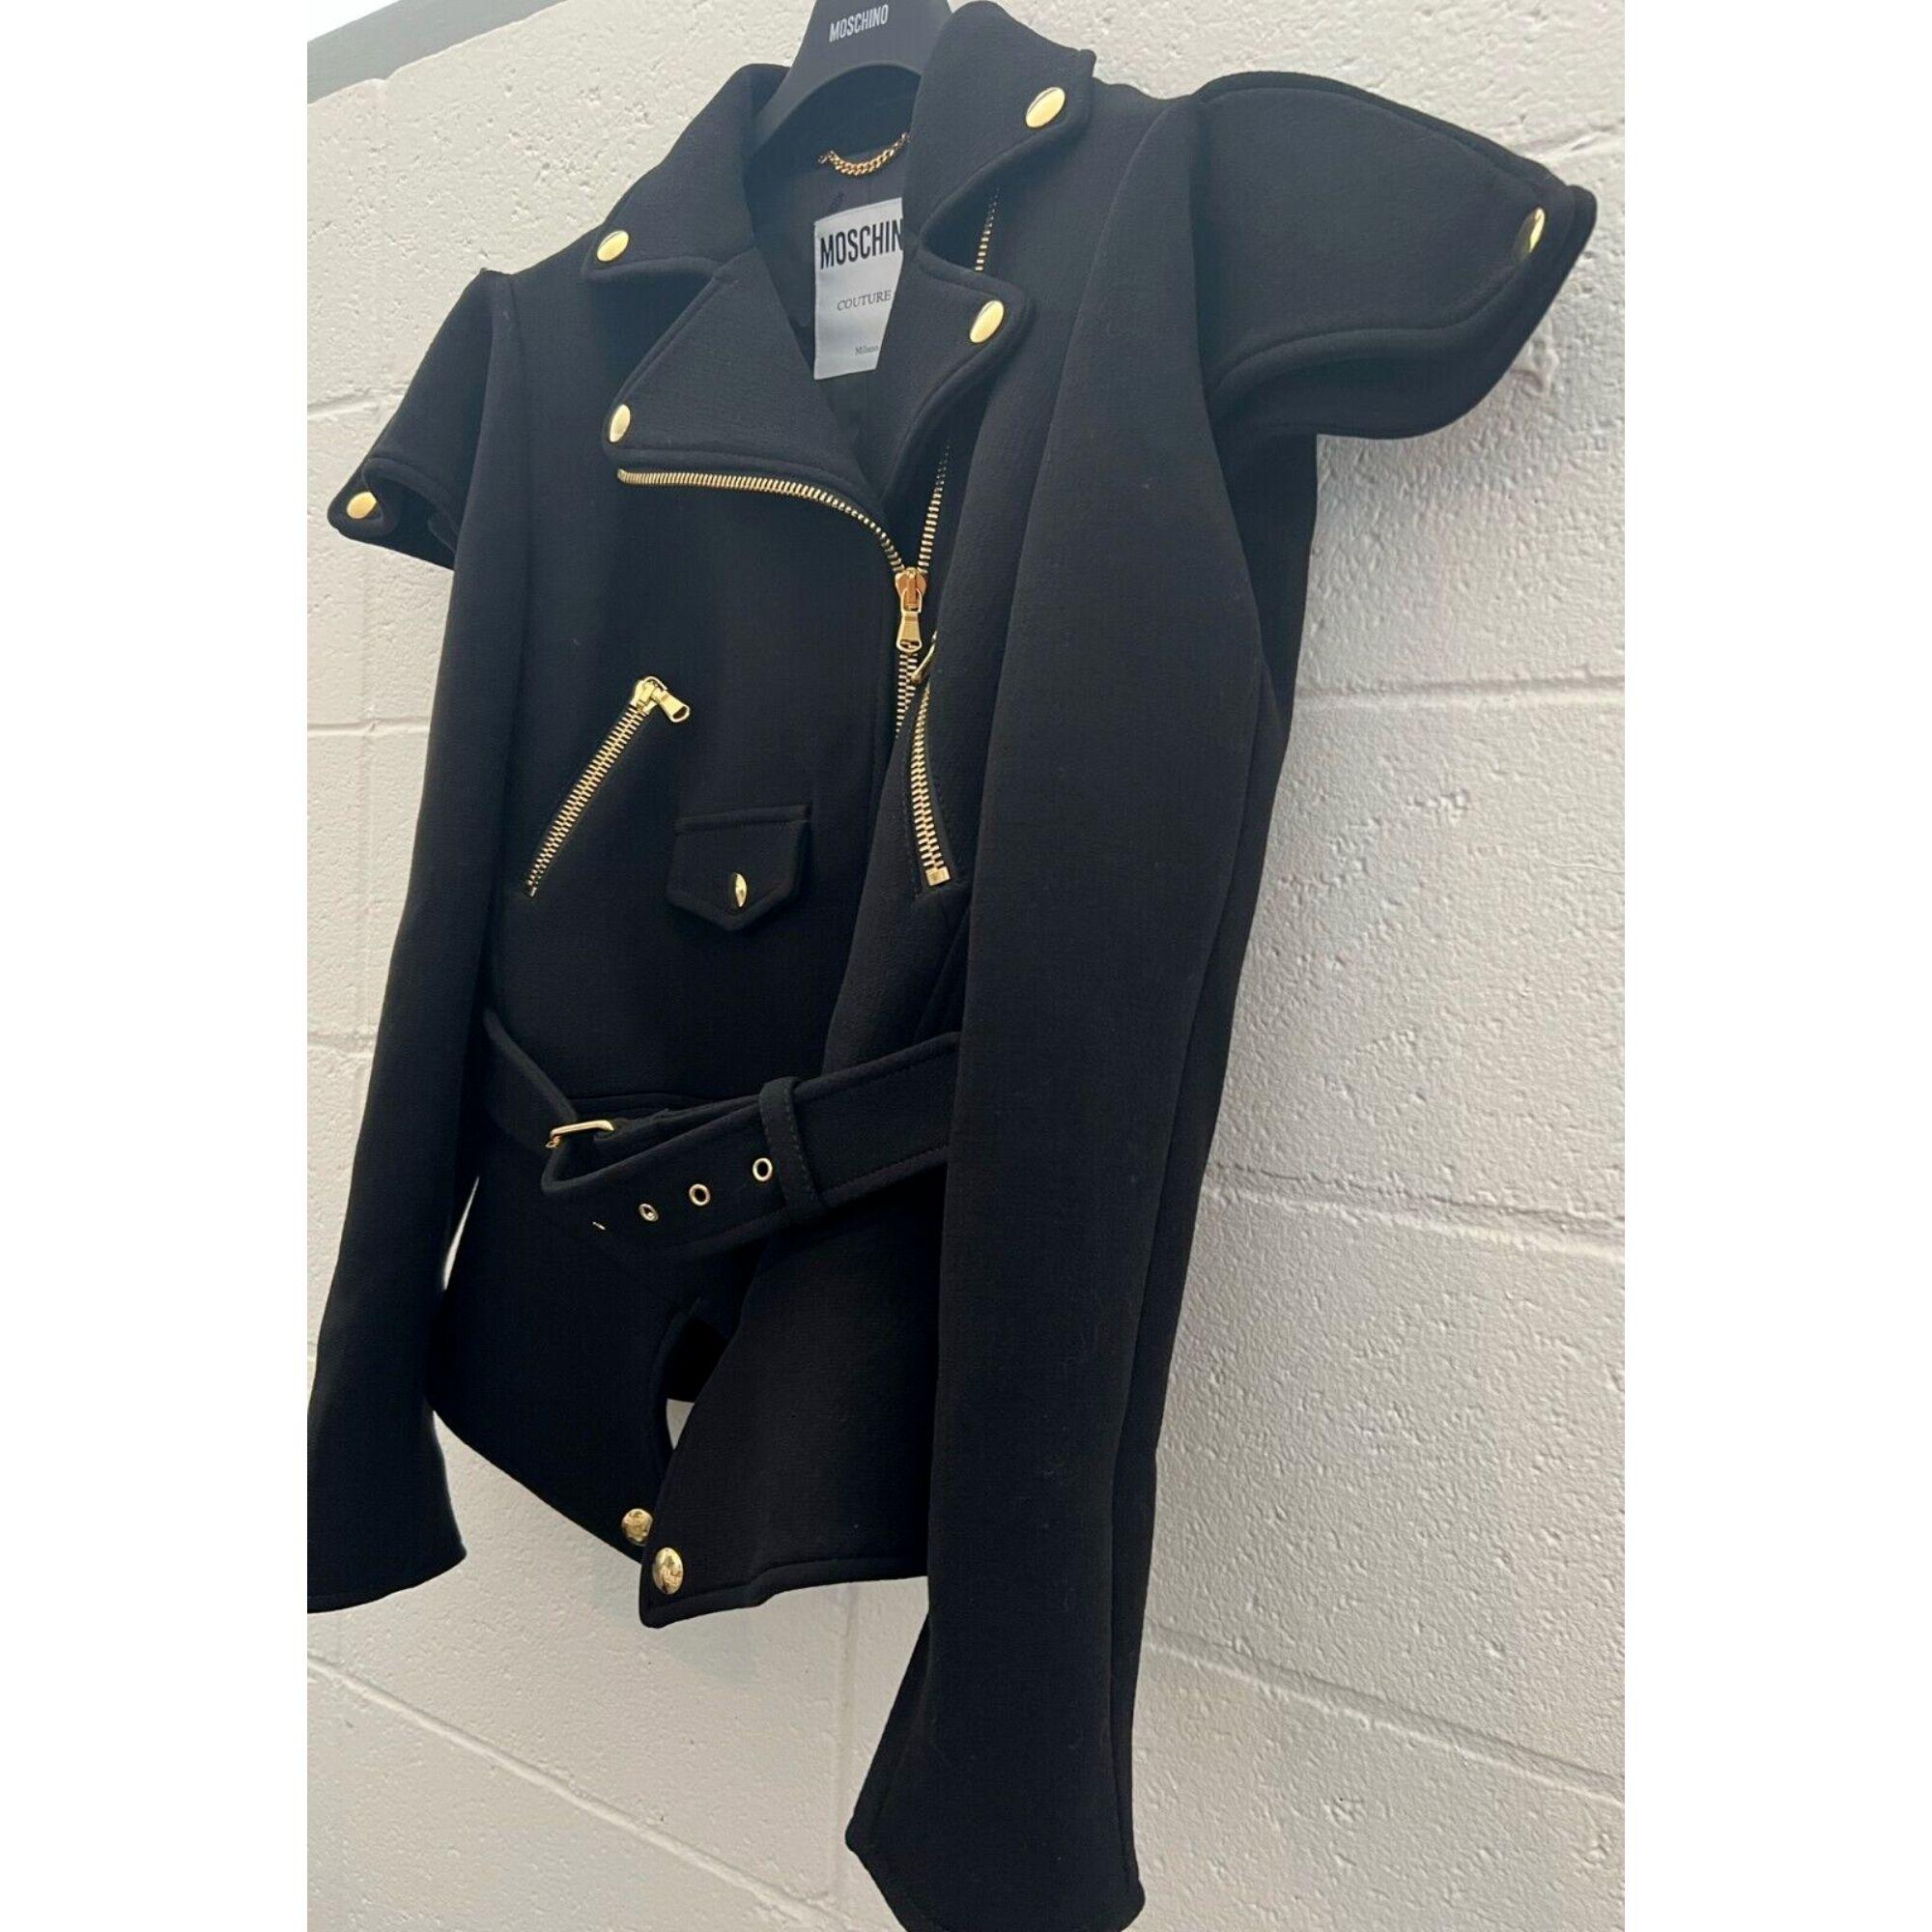 AW21 Moschino Couture Jeremy Scott Black Viscose Jacket/Coat with Gold Hardware

Additional Information:
Material: 100% Viscose
Color: Black
Size: IT 42 / US 8
Pattern: Solid
Style: Overcoat
Dimensions: Shoulder to shoulder 16